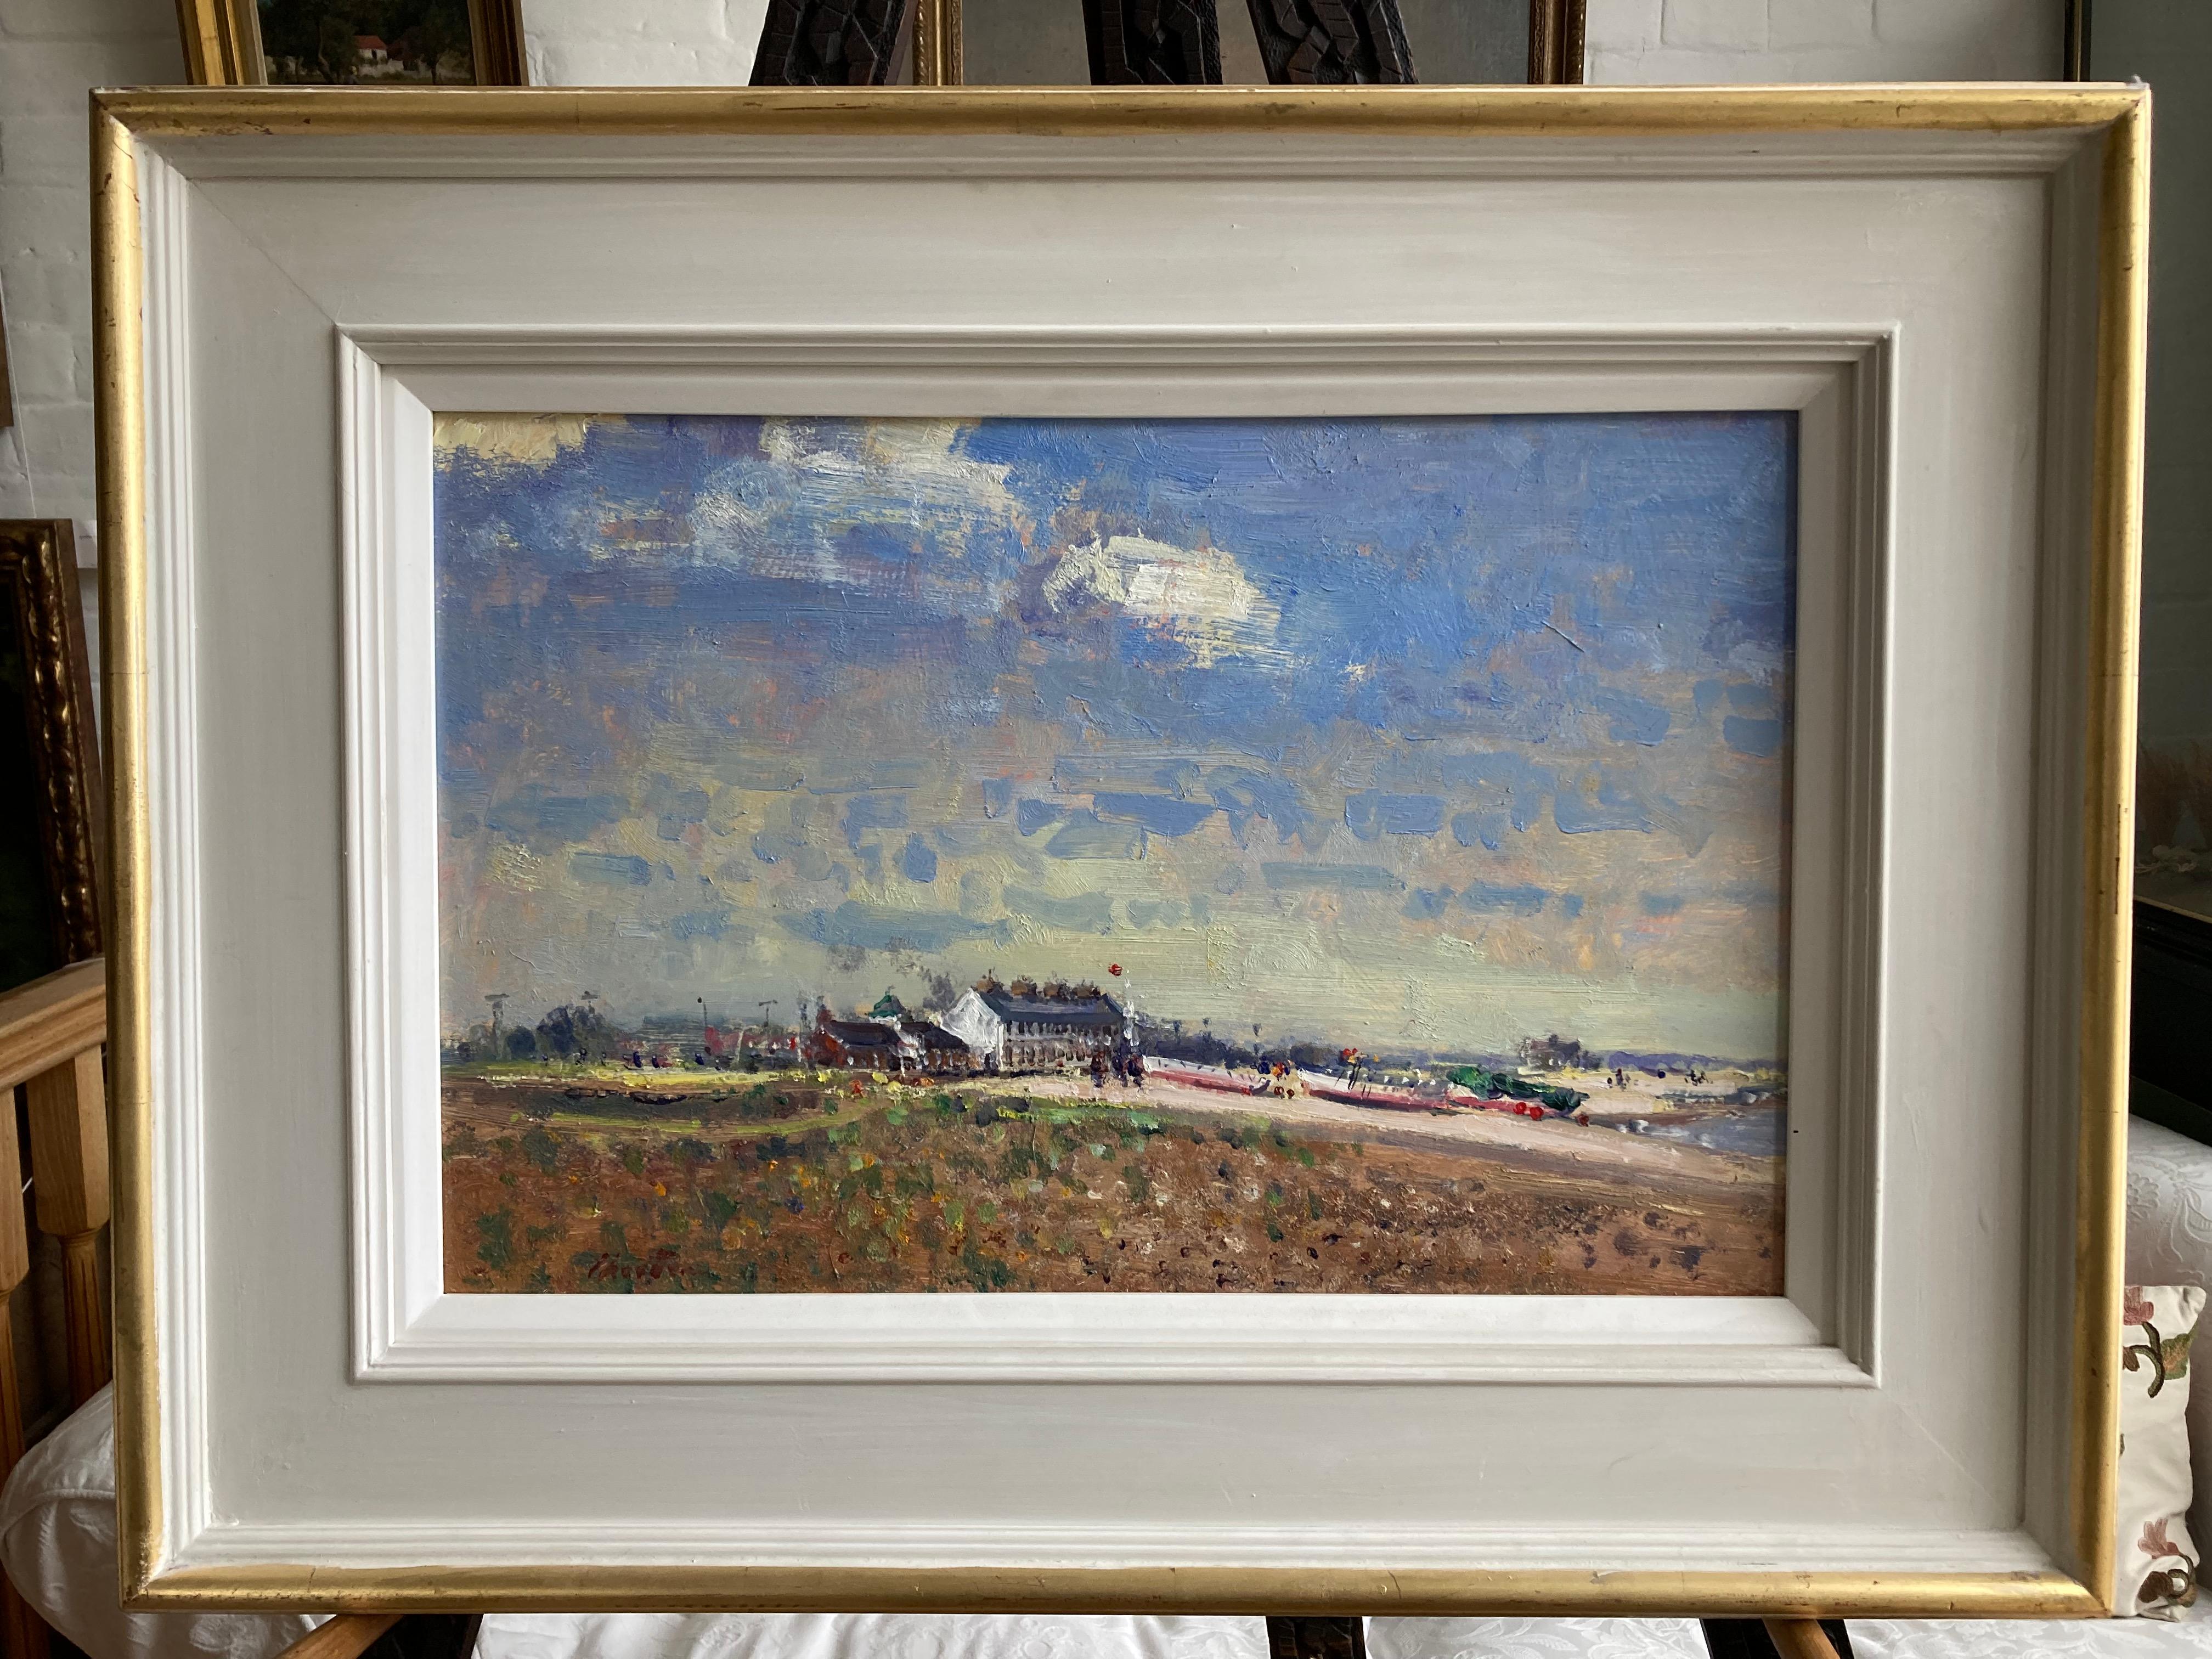 A wonderful summer sky in this well known Suffolk view. 

Geoffrey Chatten ( born 1942)
Shingle Street, Suffolk
Signed
Oil on board
14 x 21 inches including the frame
22 x 29 with the frame

Born at Gorleston-on-Sea, Norfolk, the artist had a keen